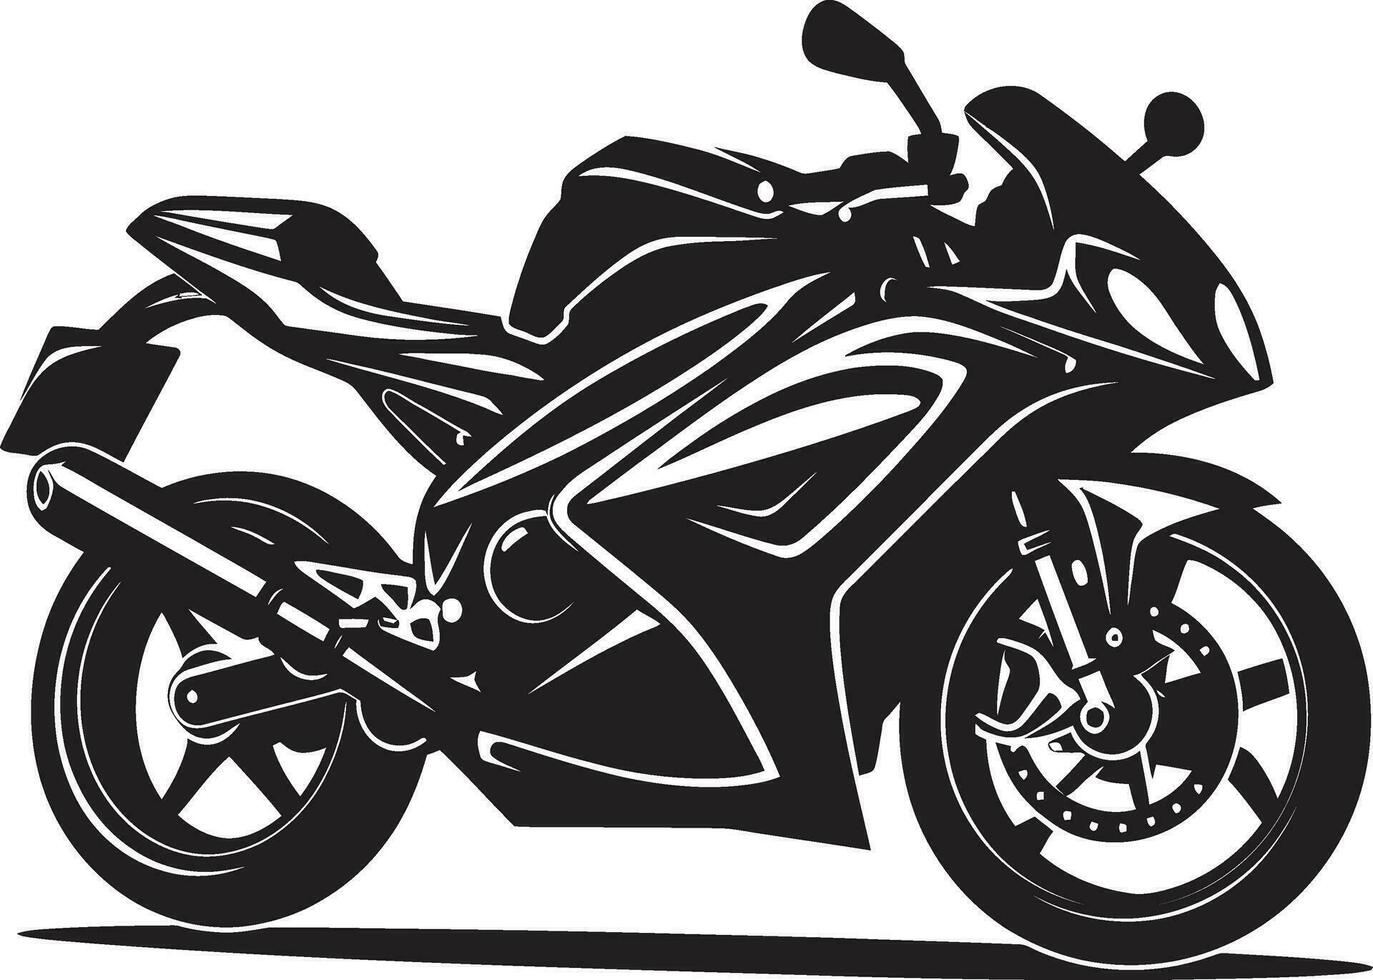 Riding the Vectors Sports Bike Vectors on Point Sport Bike Elegance in Vector Style